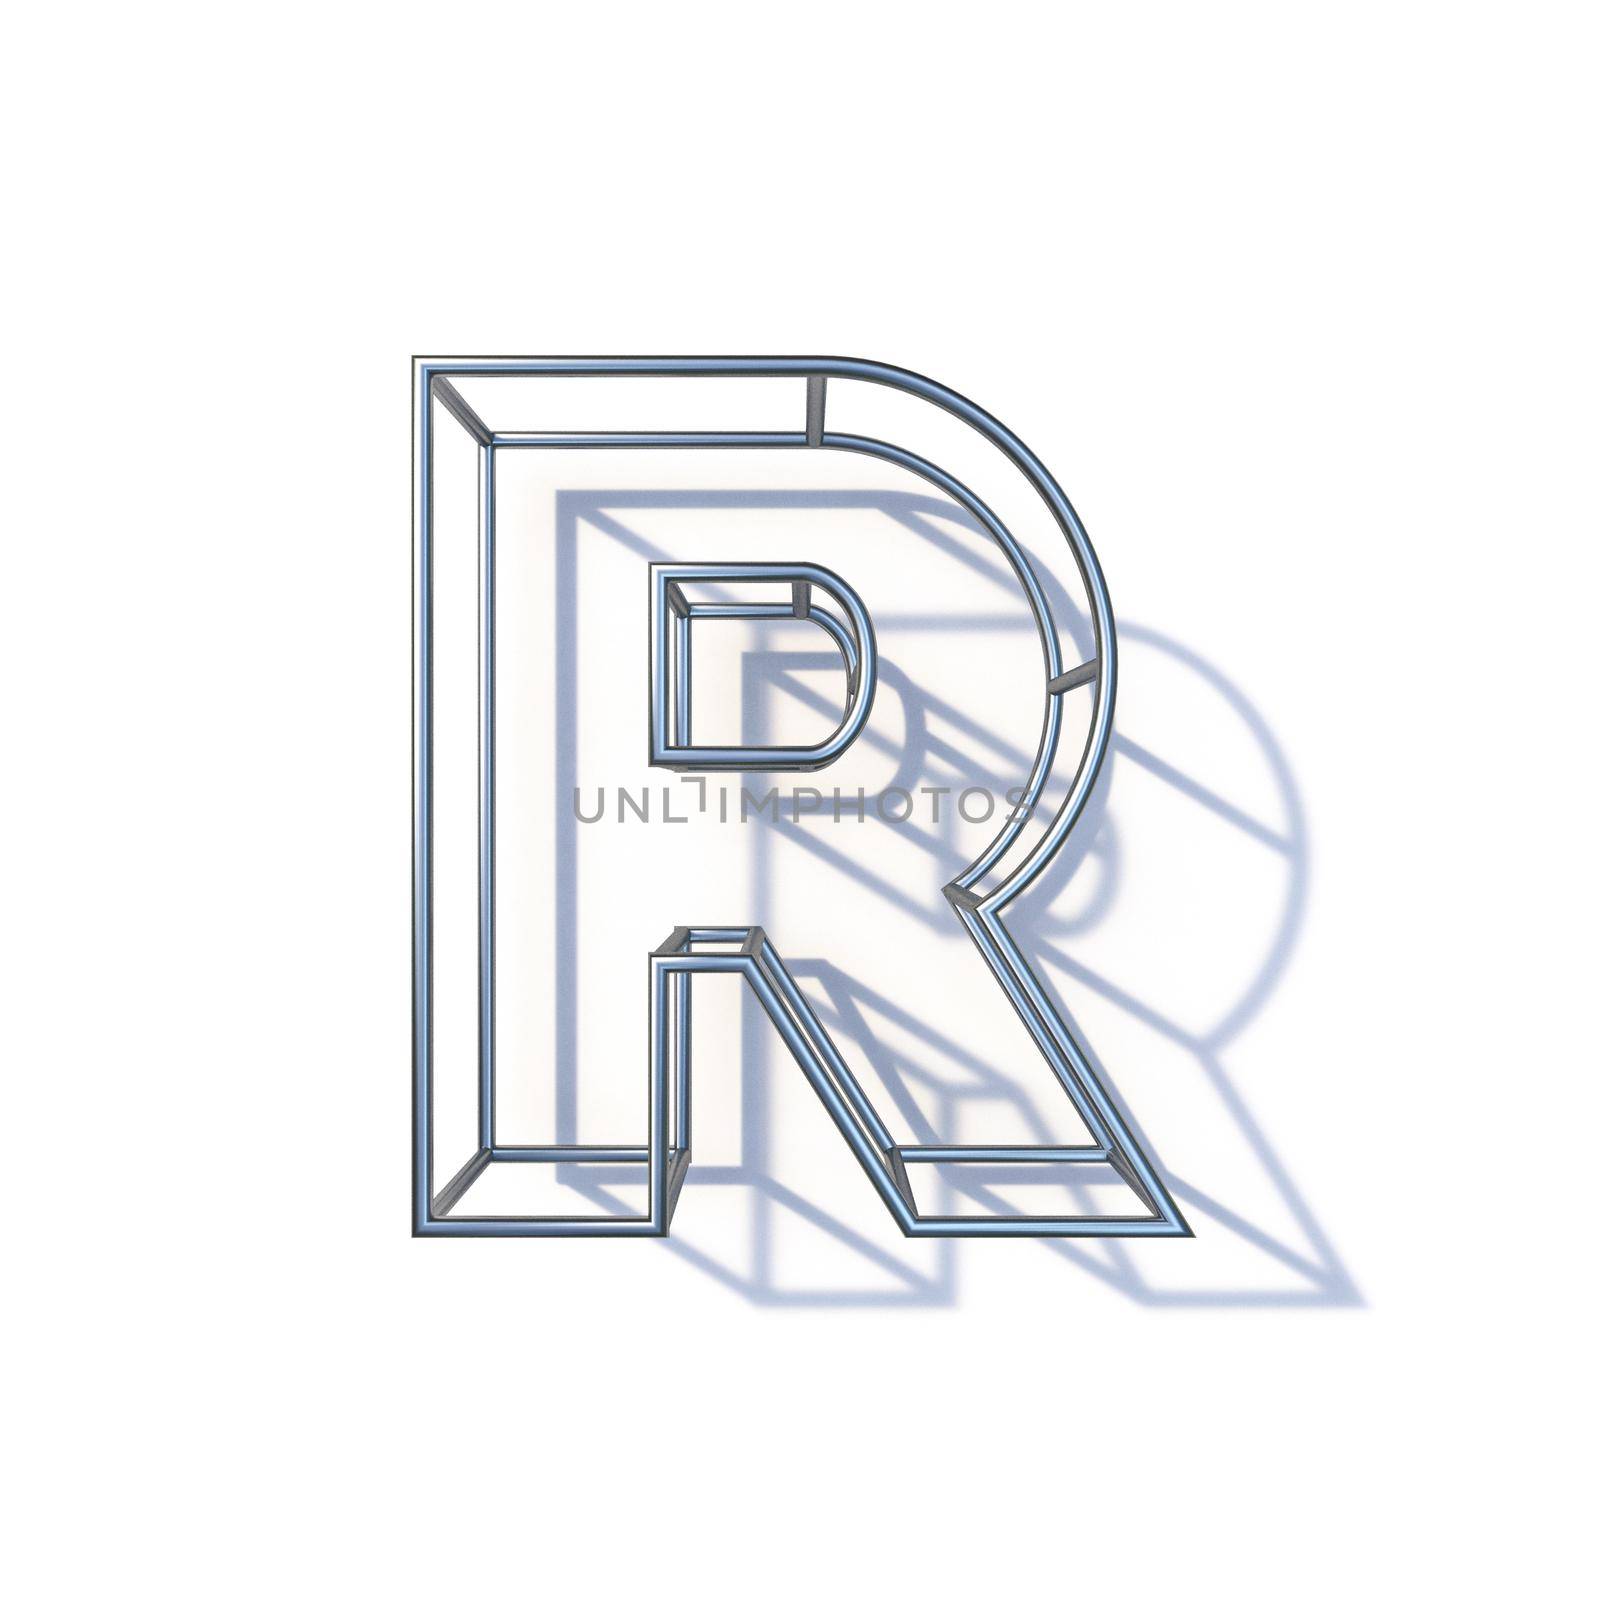 Steel wire frame font Letter R 3D by djmilic